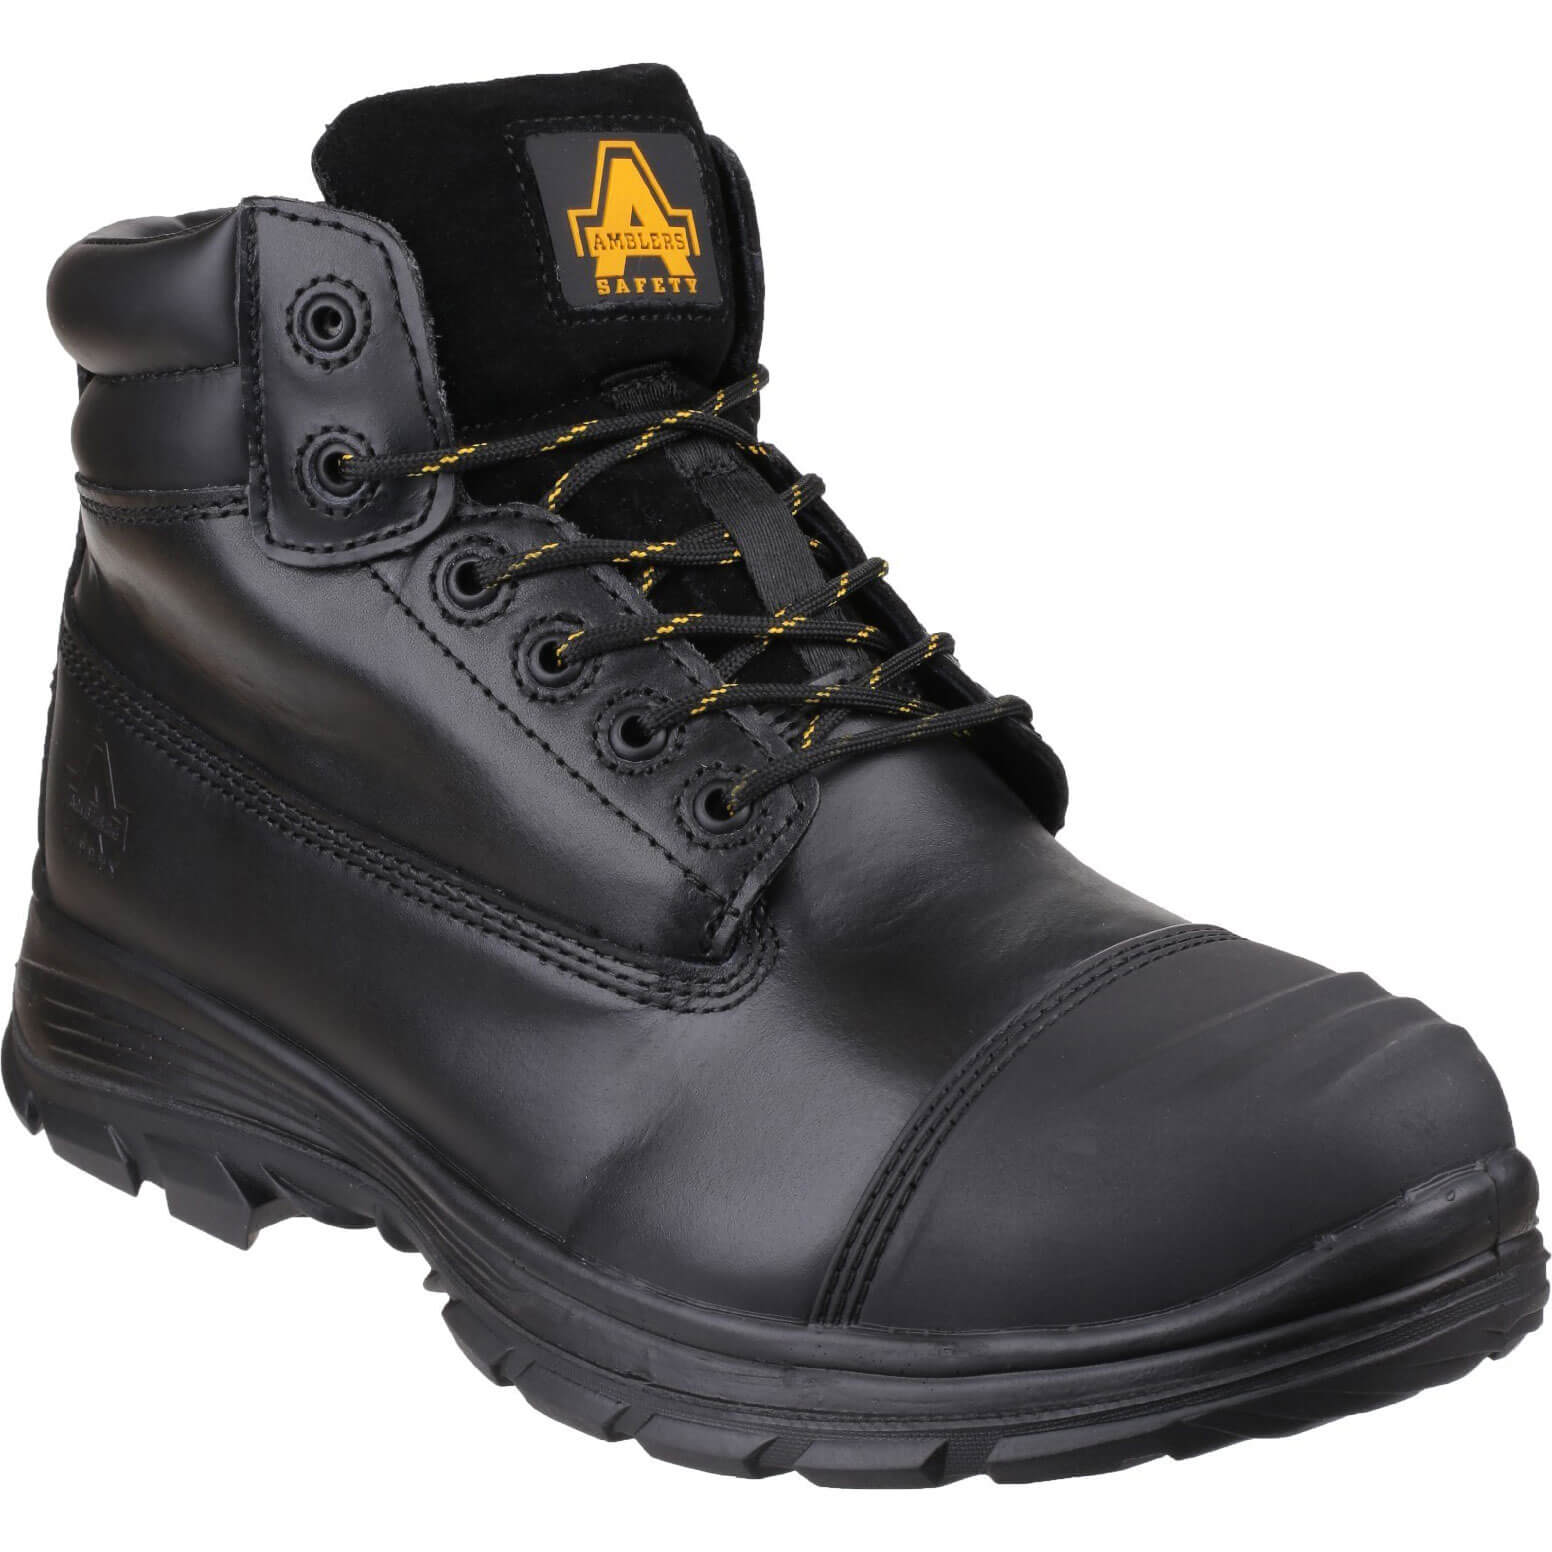 Image of Amblers Mens Safety FS301 Brecon Water Resistant Metatarsal Guard Safety Boots Black Size 12